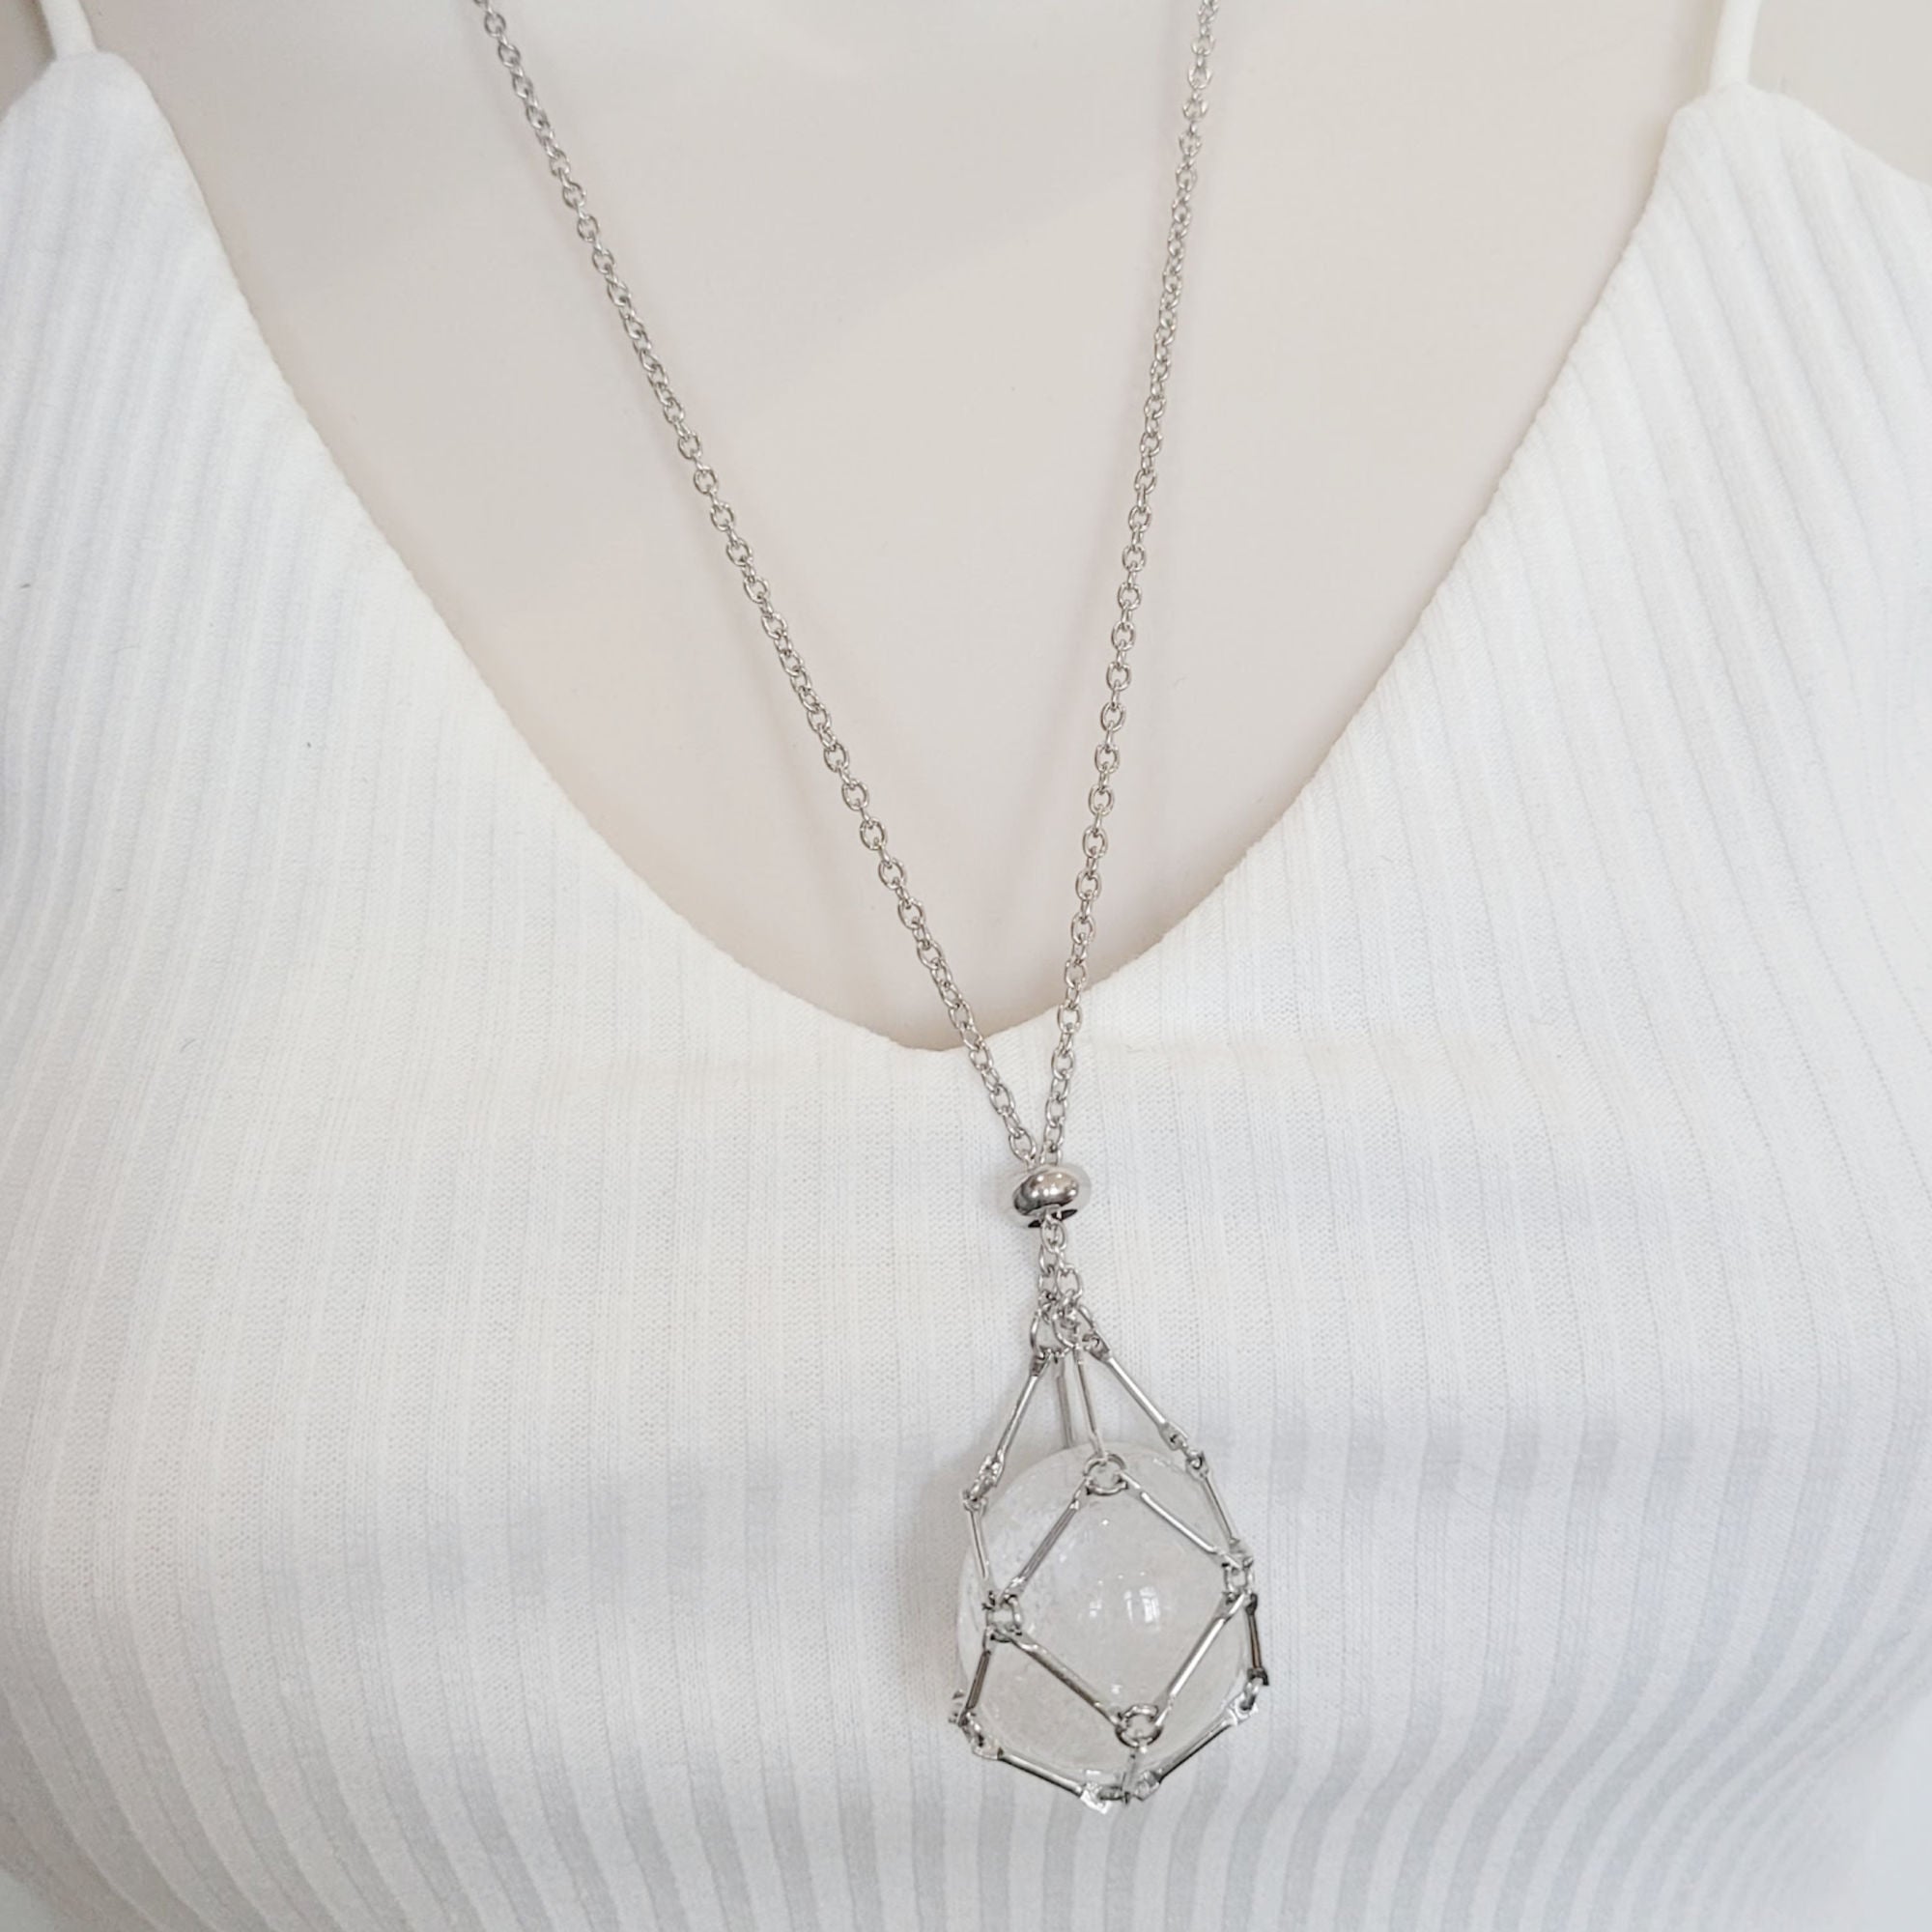 Crystal Ball Cage Necklace